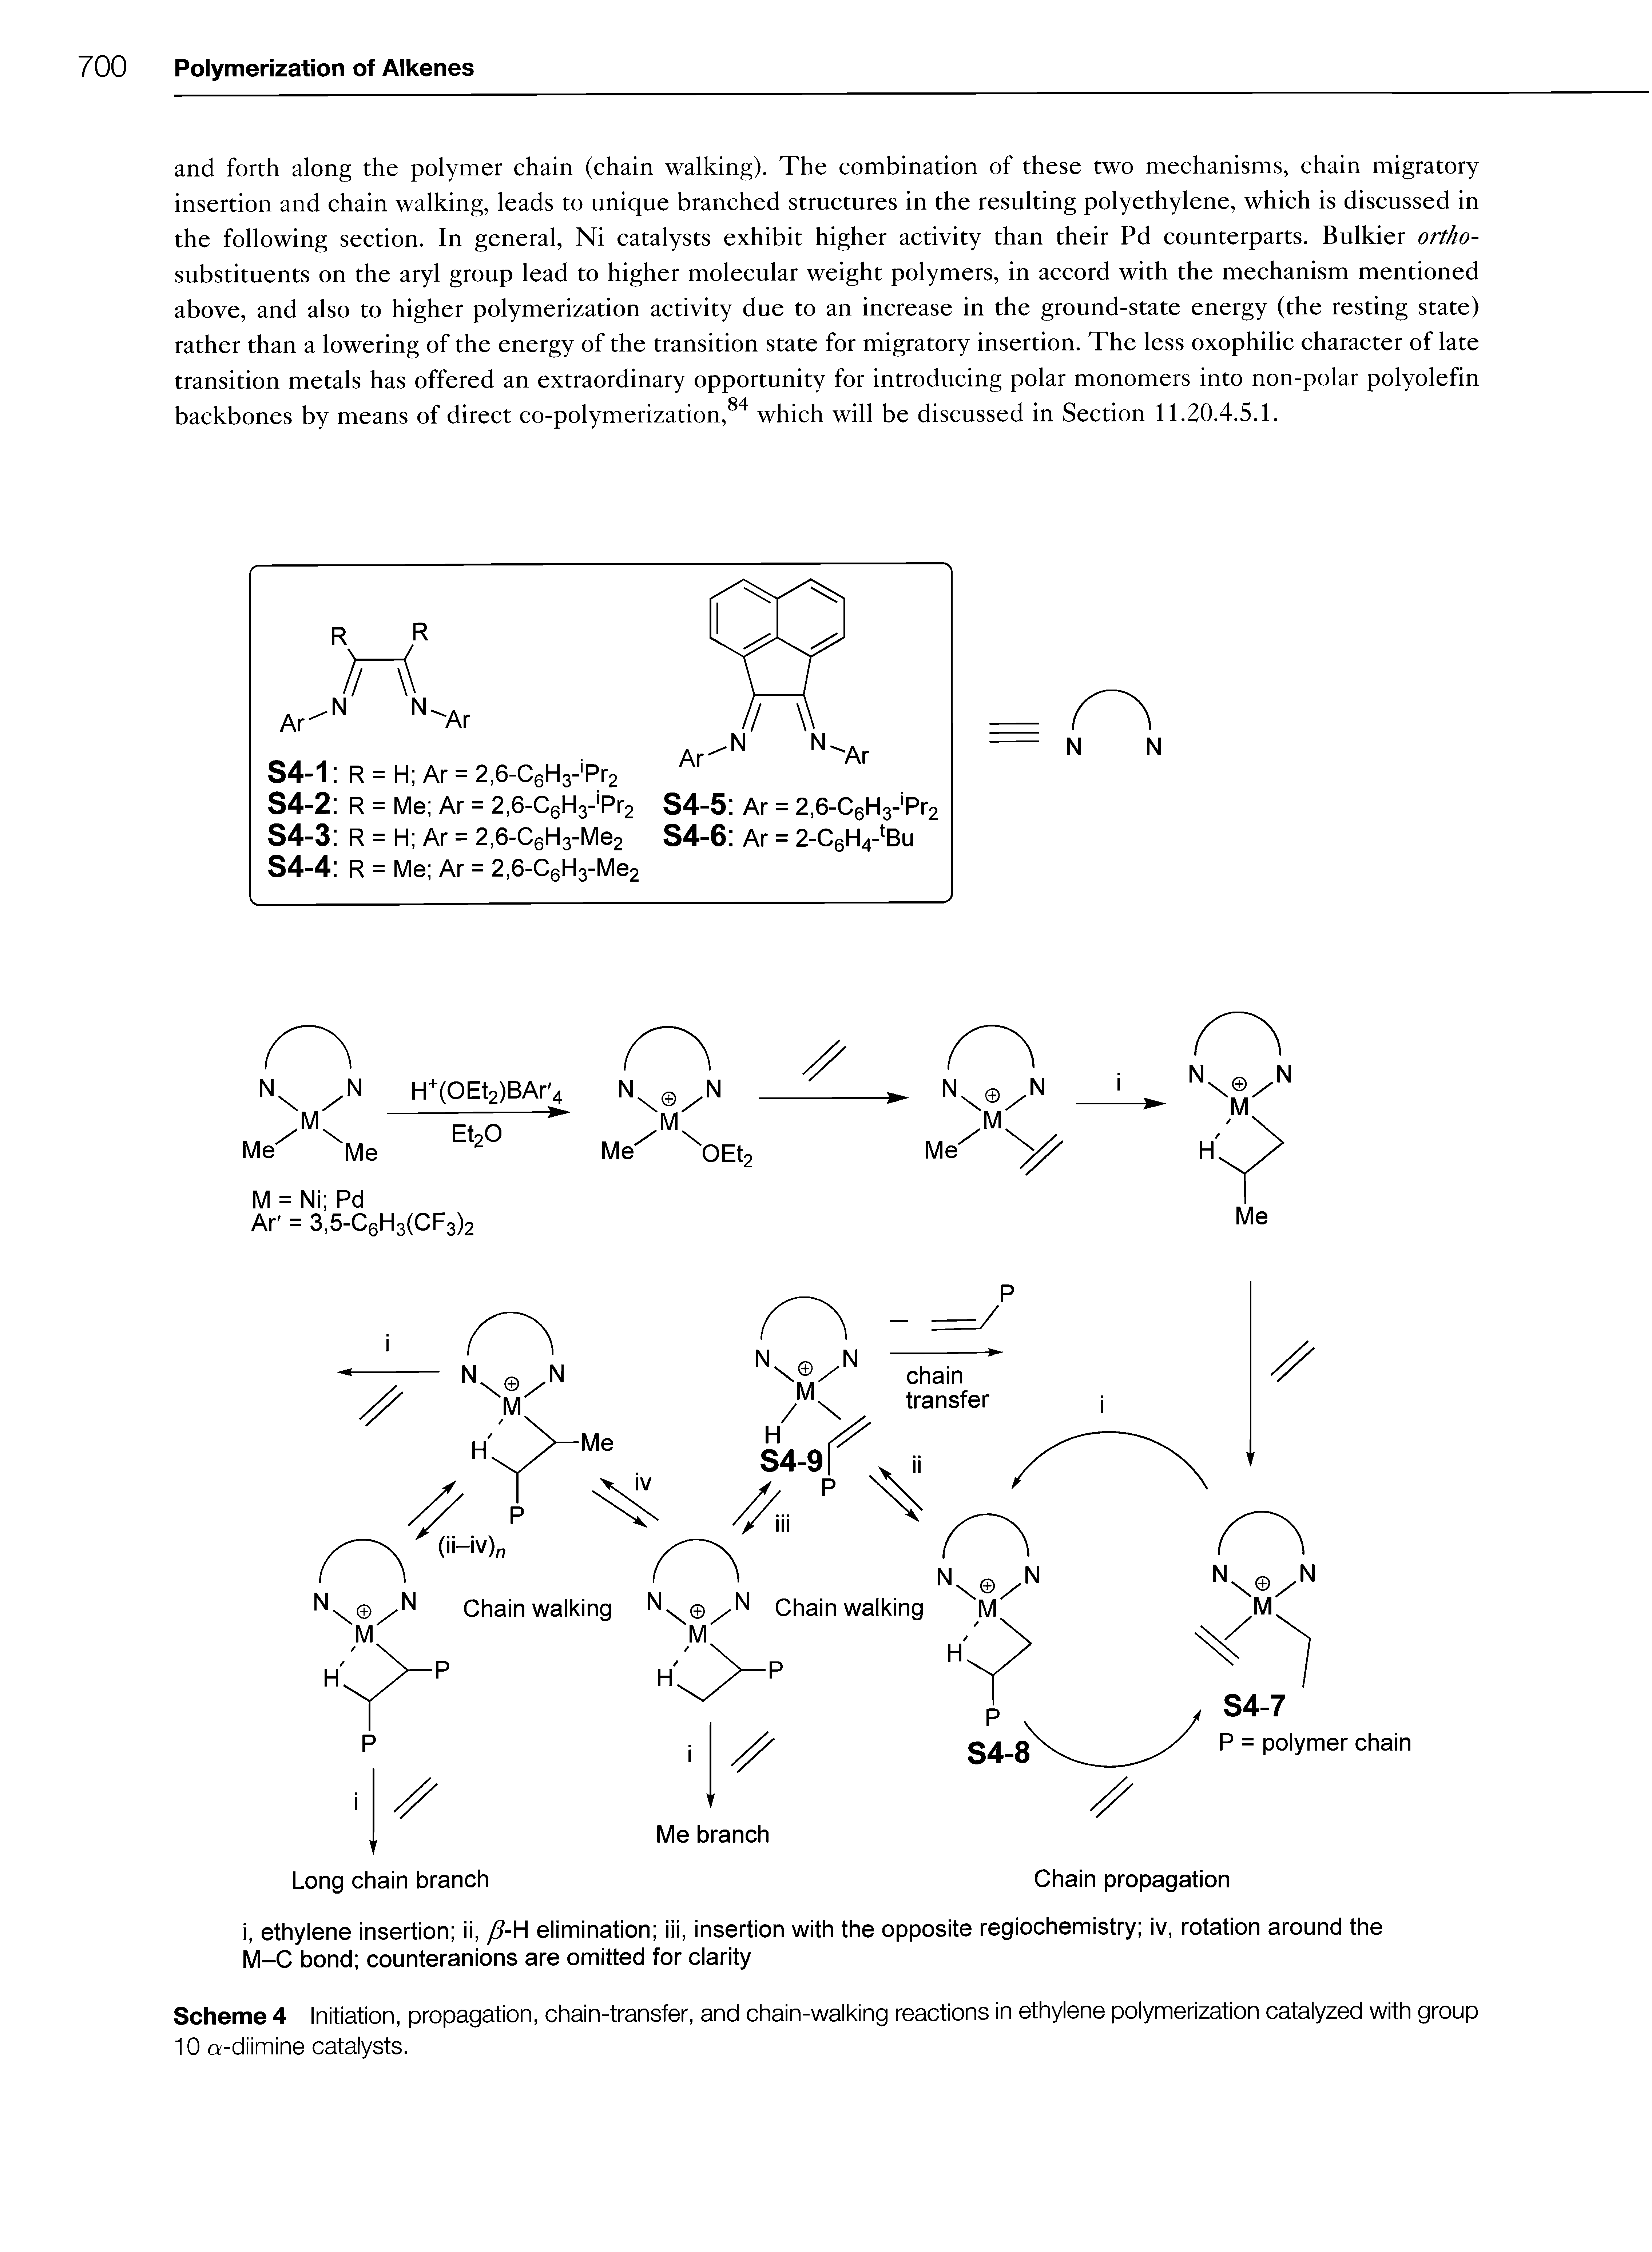 Scheme 4 Initiation, propagation, chain-transfer, and chain-walking reactions in ethylene polymerization catalyzed with group 10 a-diimine catalysts.